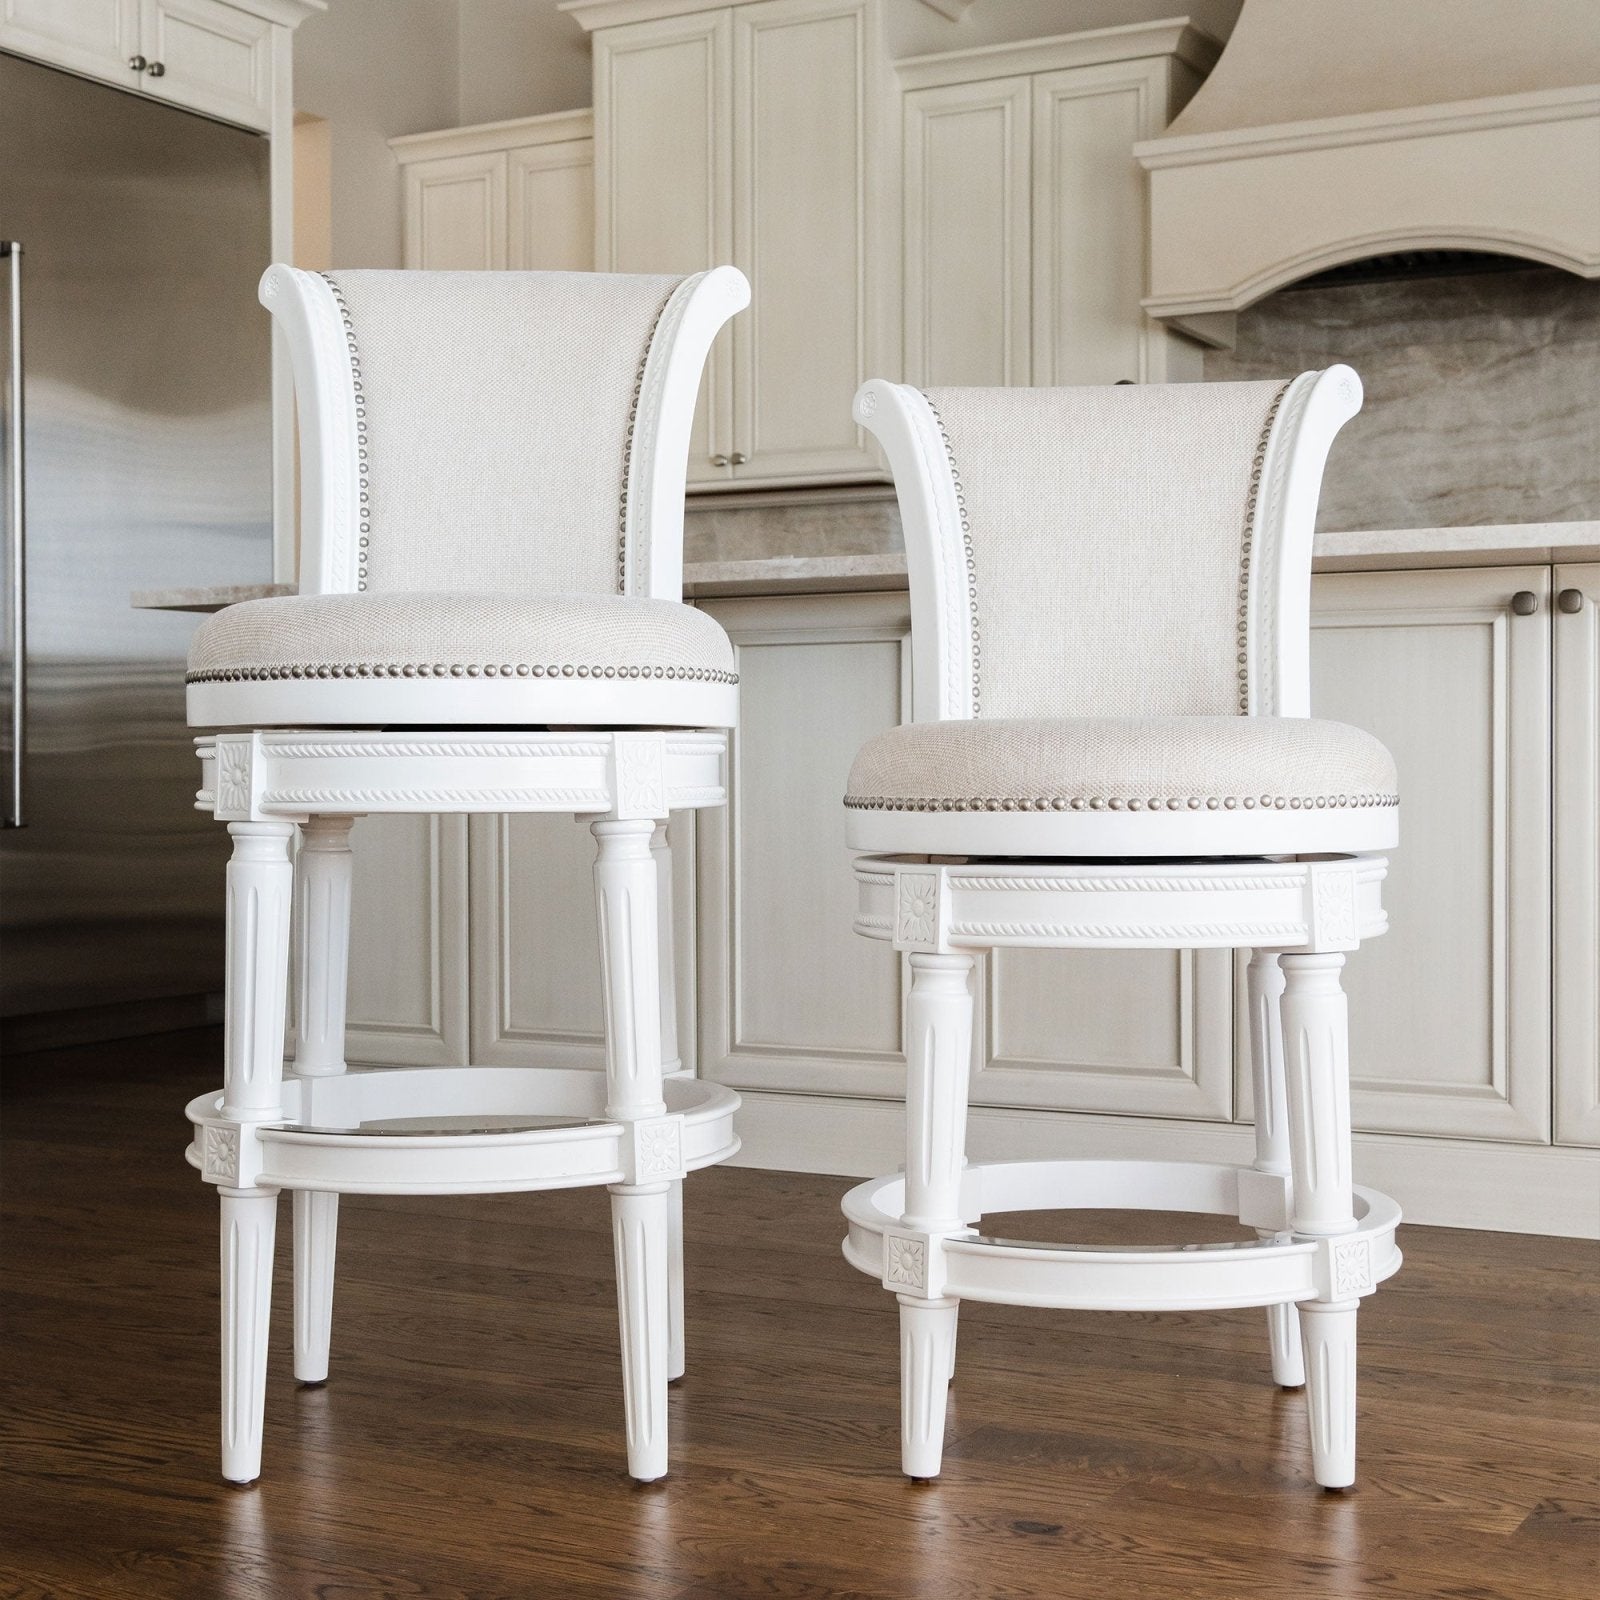 Pullman Bar Stool in Alabaster White Finish with Cream Fabric Upholstery in Stools by Maven Lane